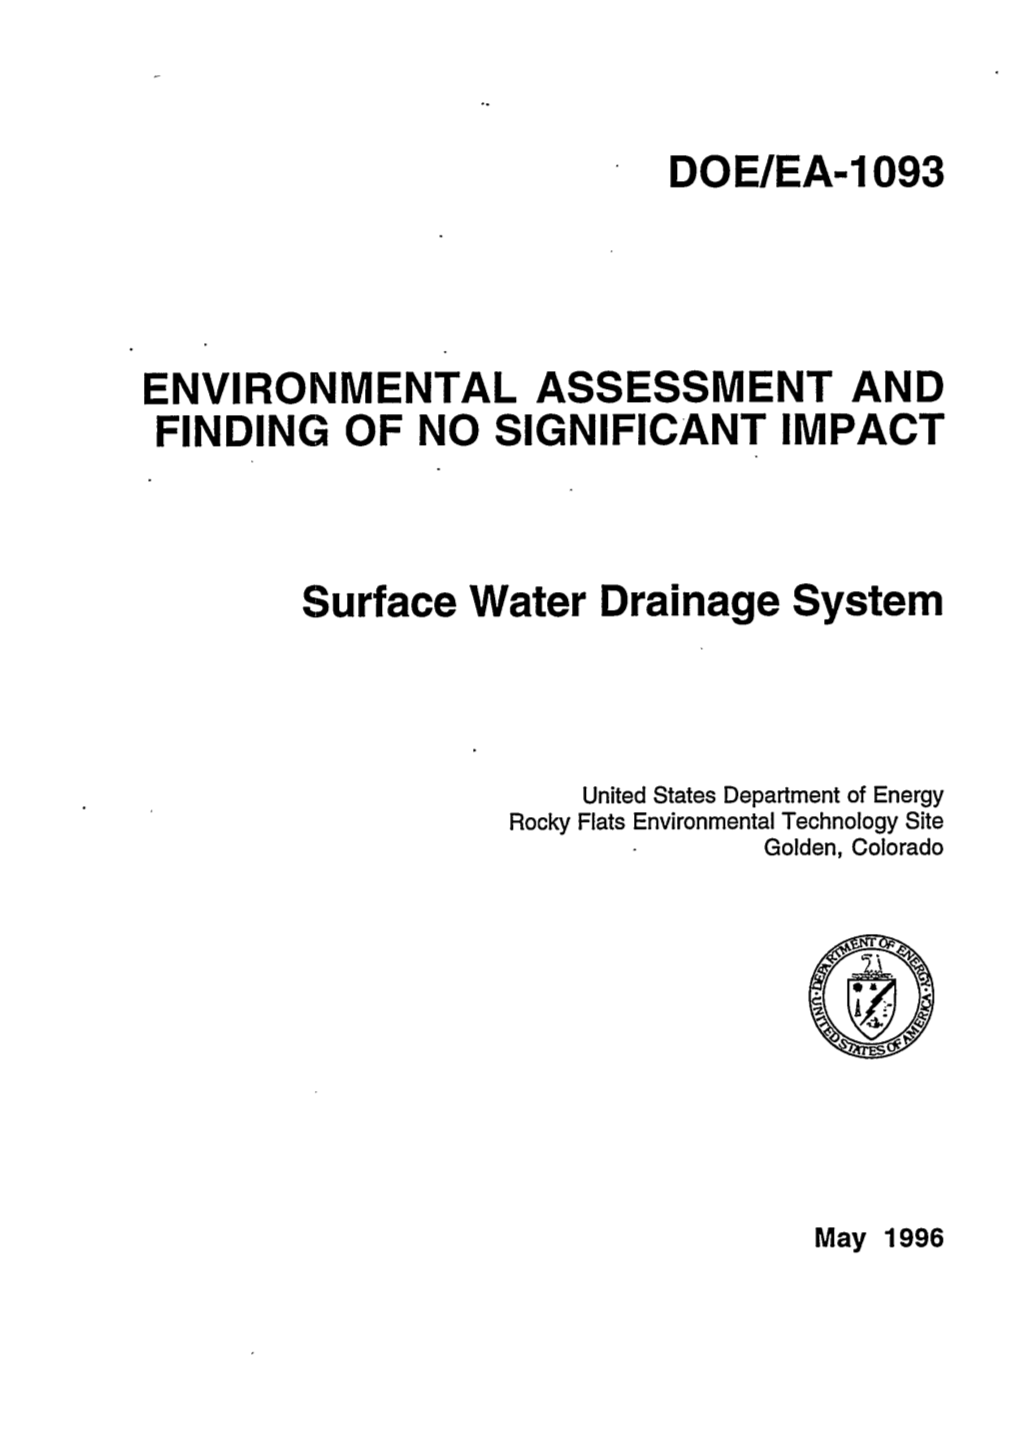 U.S. Department of Energy Finding of No Significant Impact Surface Water Drainage System at Rocky Flats Environmental Technology Site